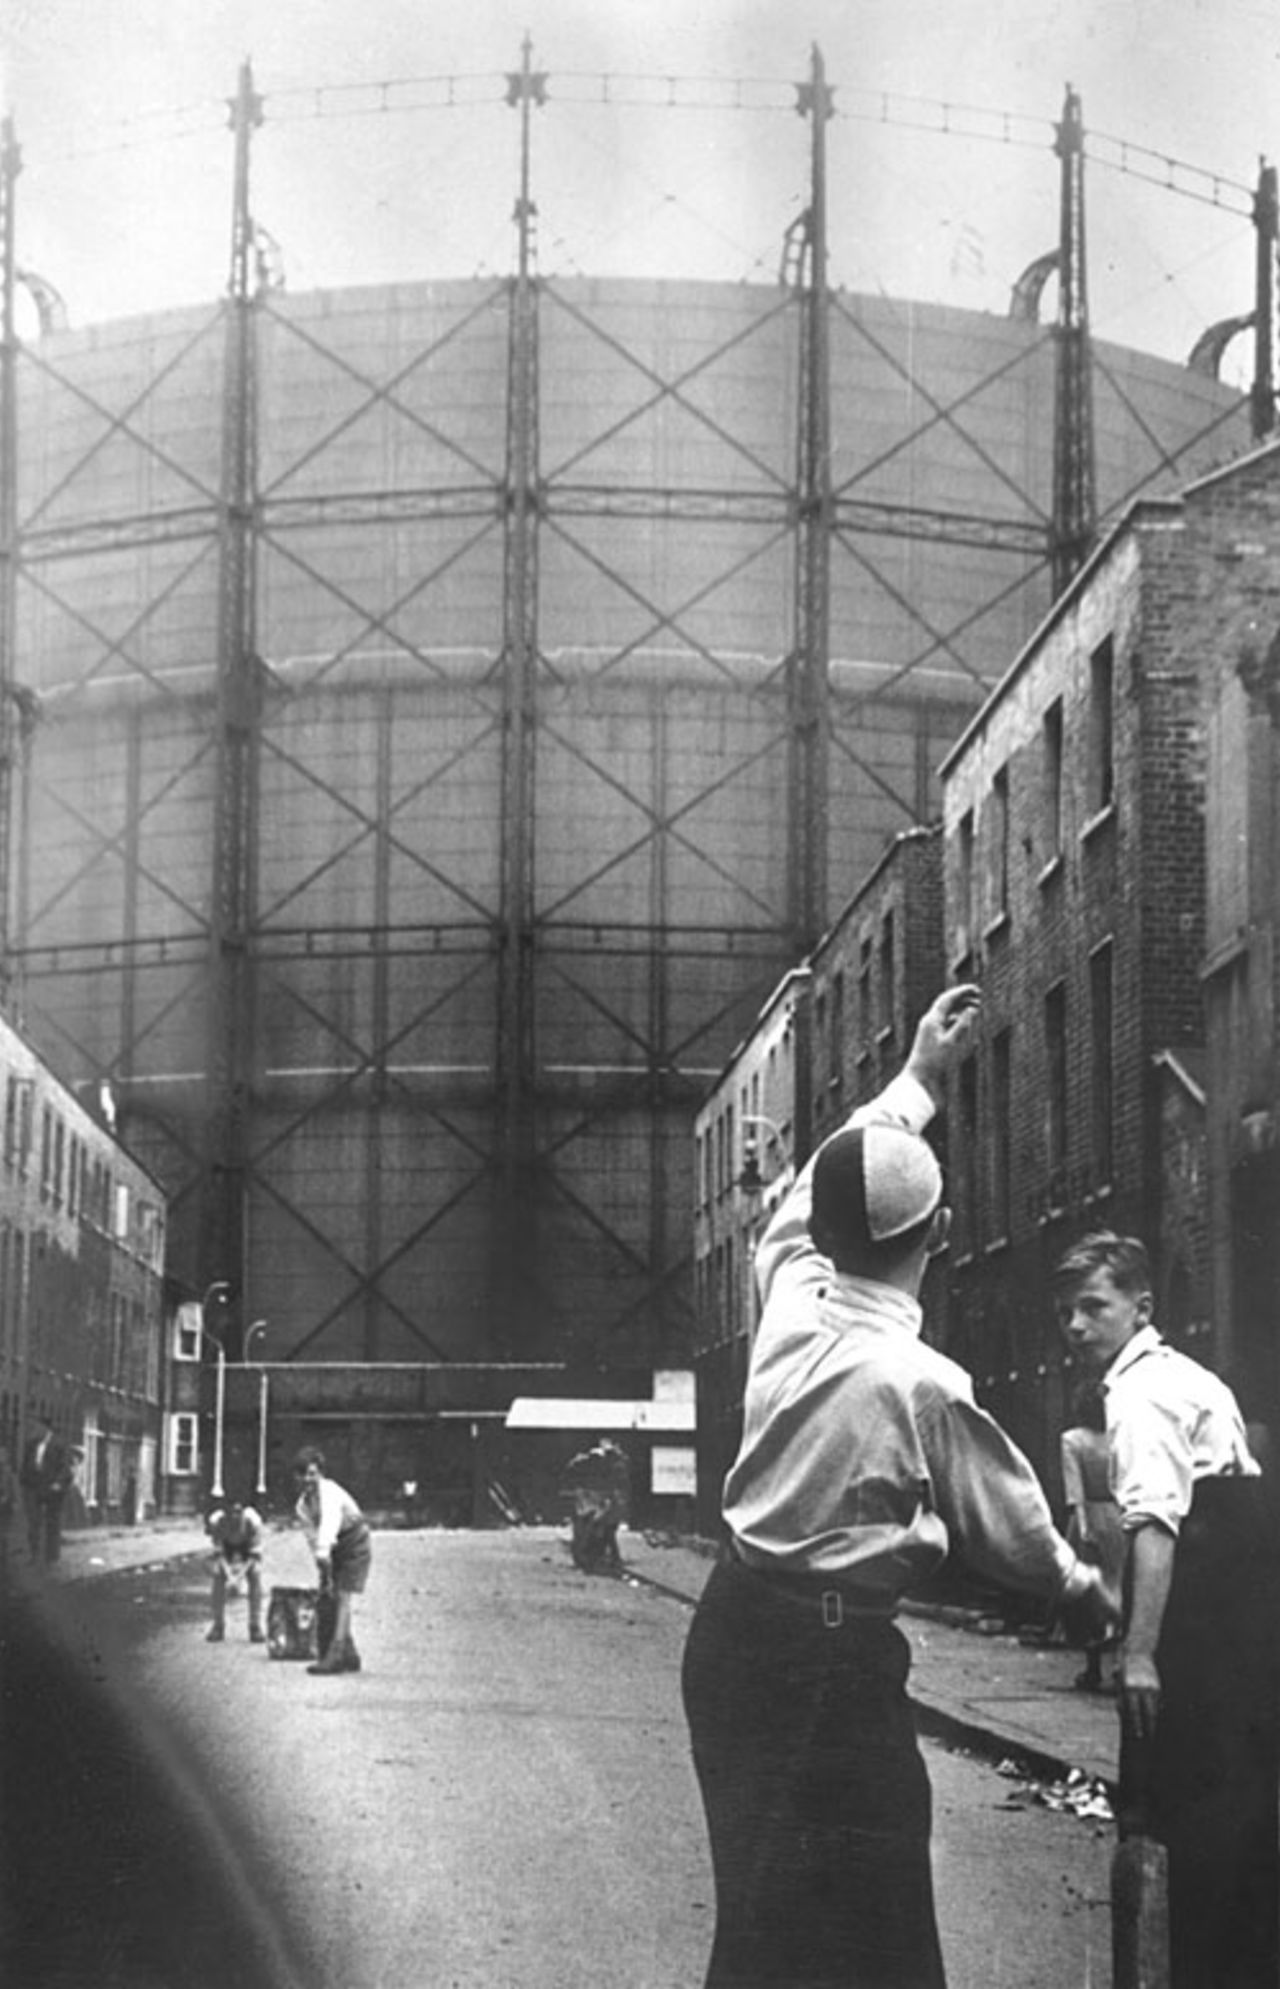 Children play cricket outside the Kennington Oval, England v Australia, 5th Test, The Oval, 2nd day, August 17, 1953